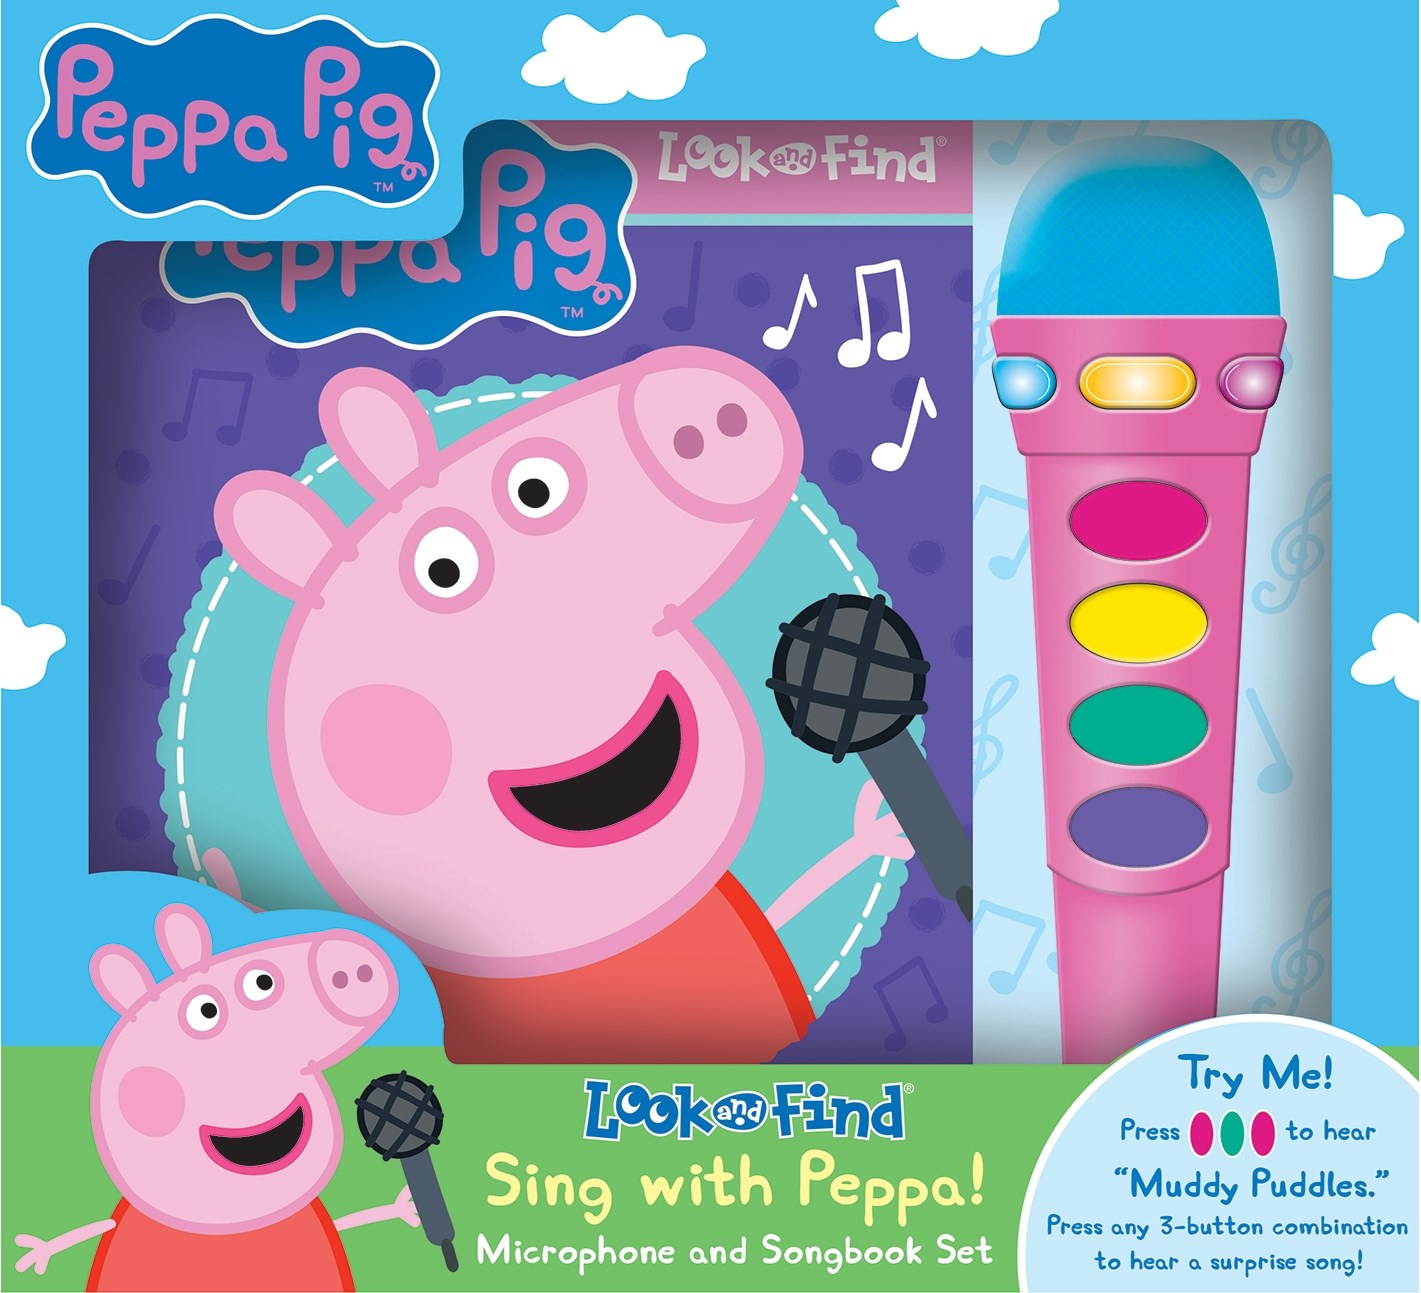 Peppa Pig: Sing with Peppa! Look and Find Microphone and Songbook Set : Look and Find Microphone and Songbook Set